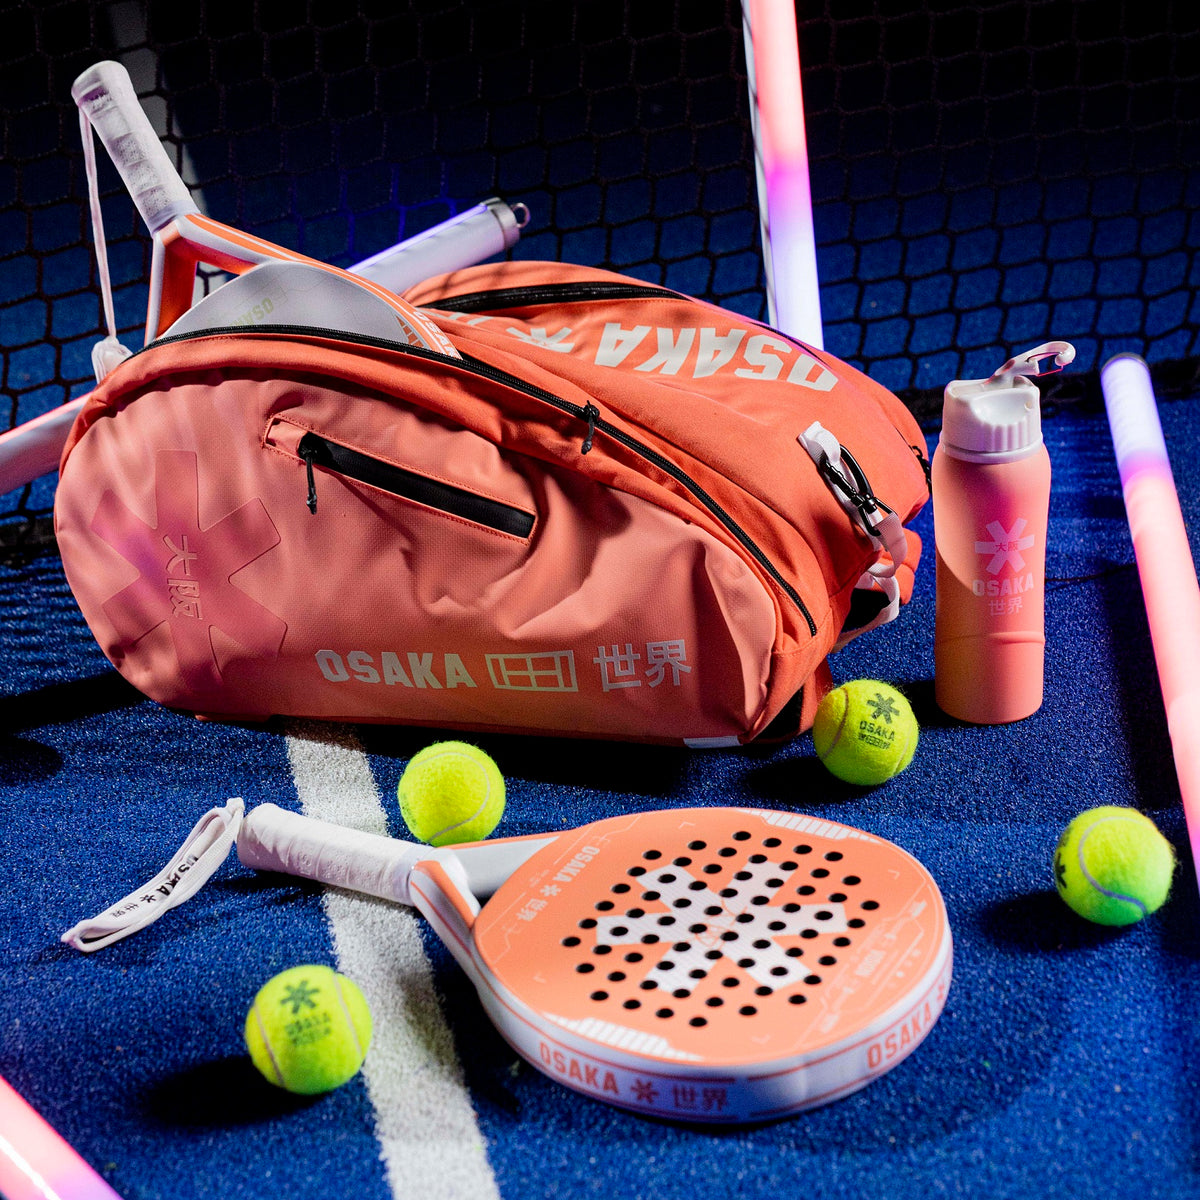 Do you know how much pressure a Tennis or Padel ball loses in a week? 